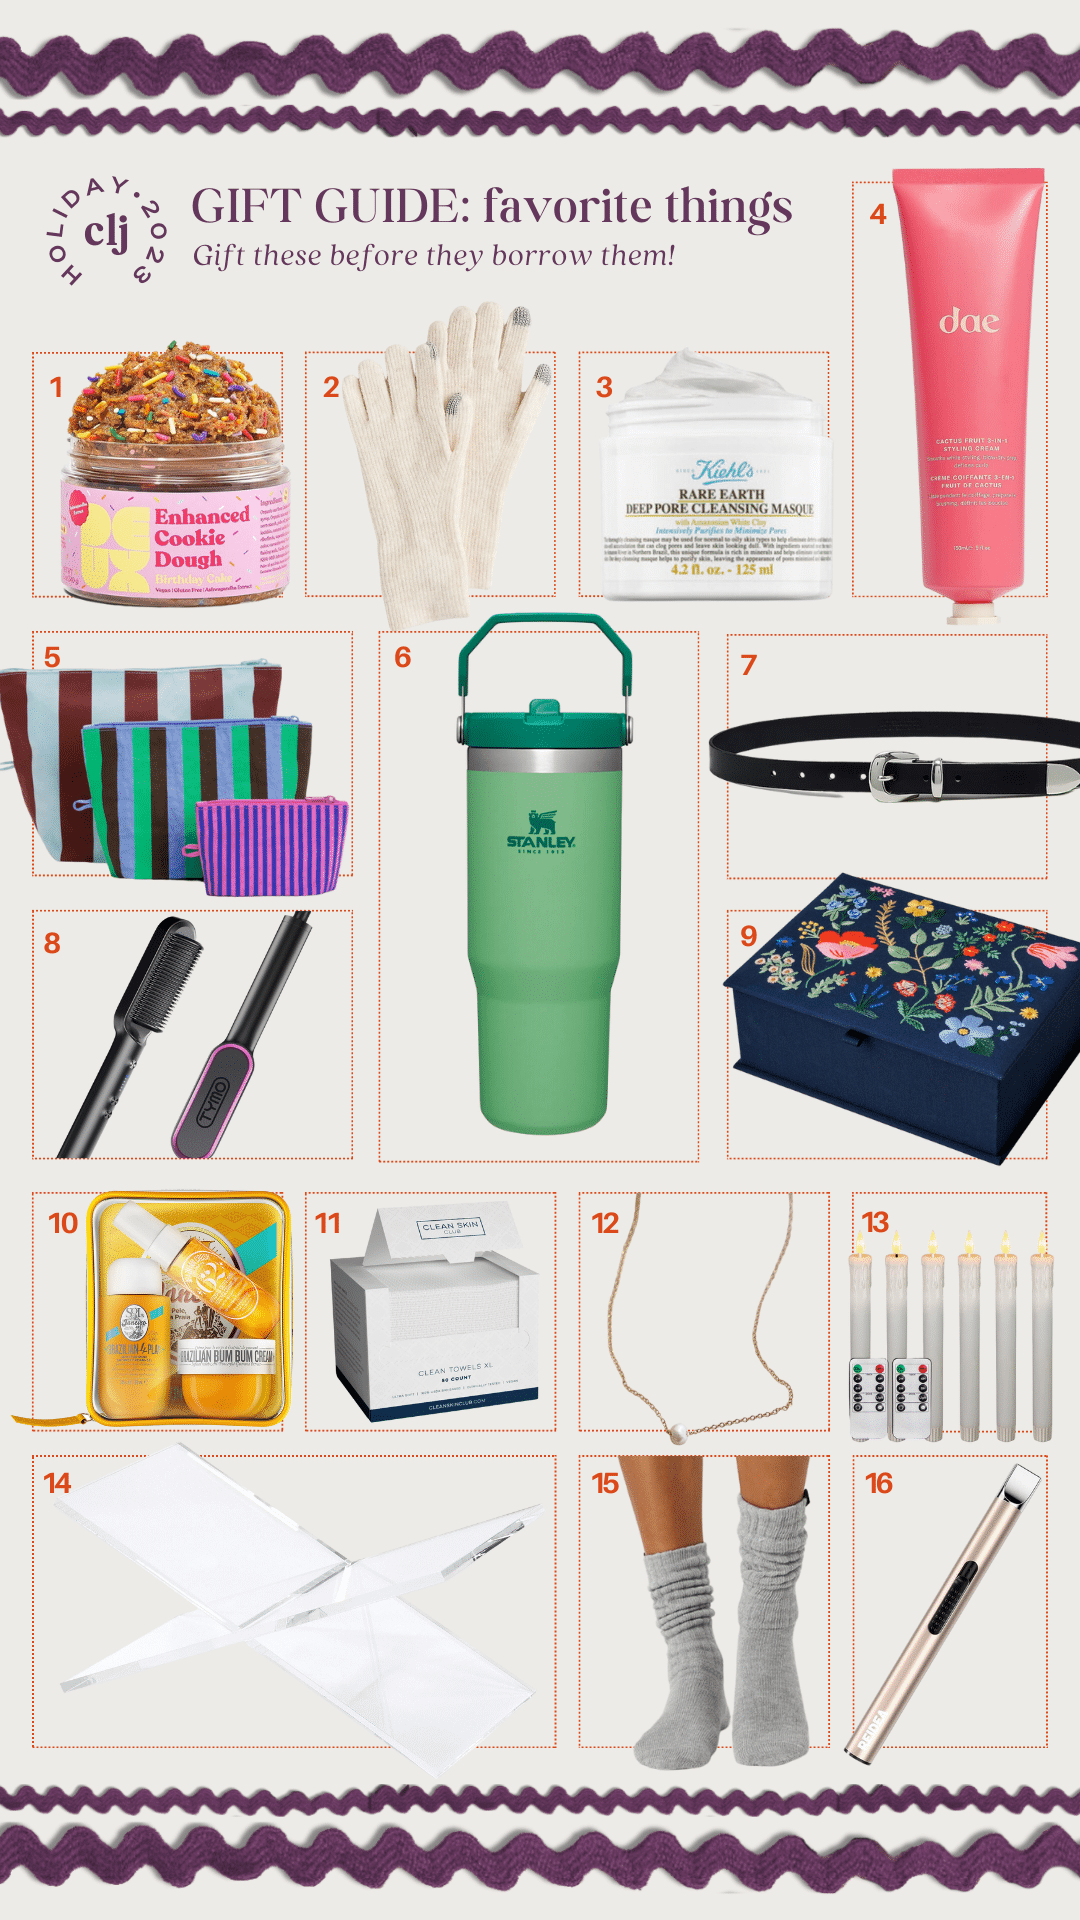 White elephant gift guide for under $50 and the official rules